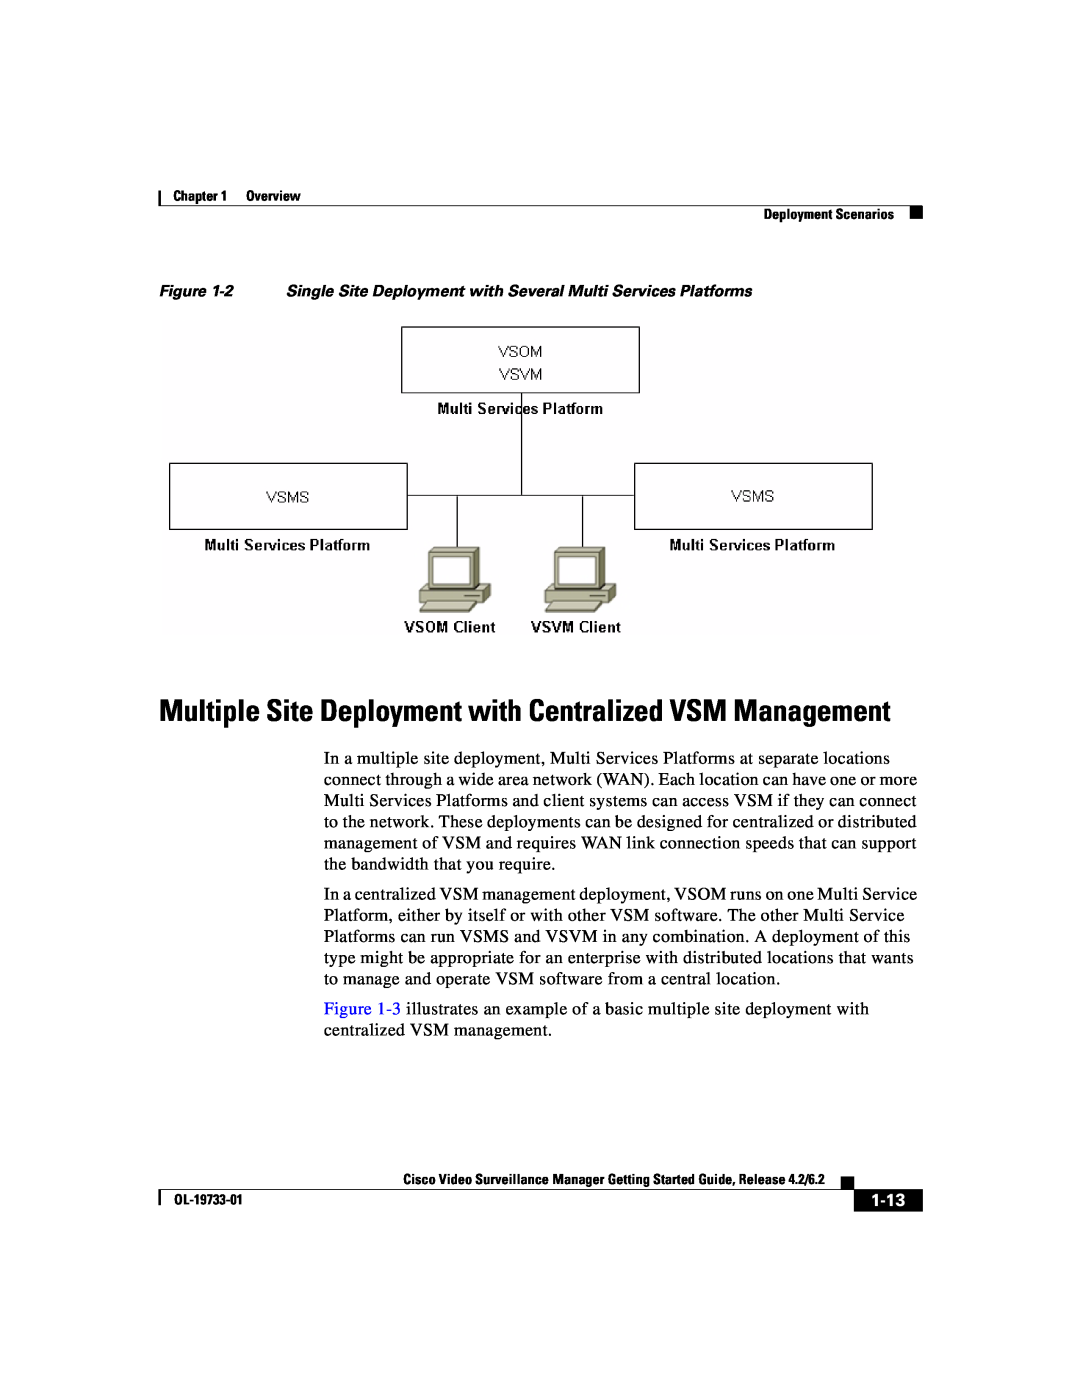 Cisco Systems Release 4.2 manual Multiple Site Deployment with Centralized VSM Management, 1-13 